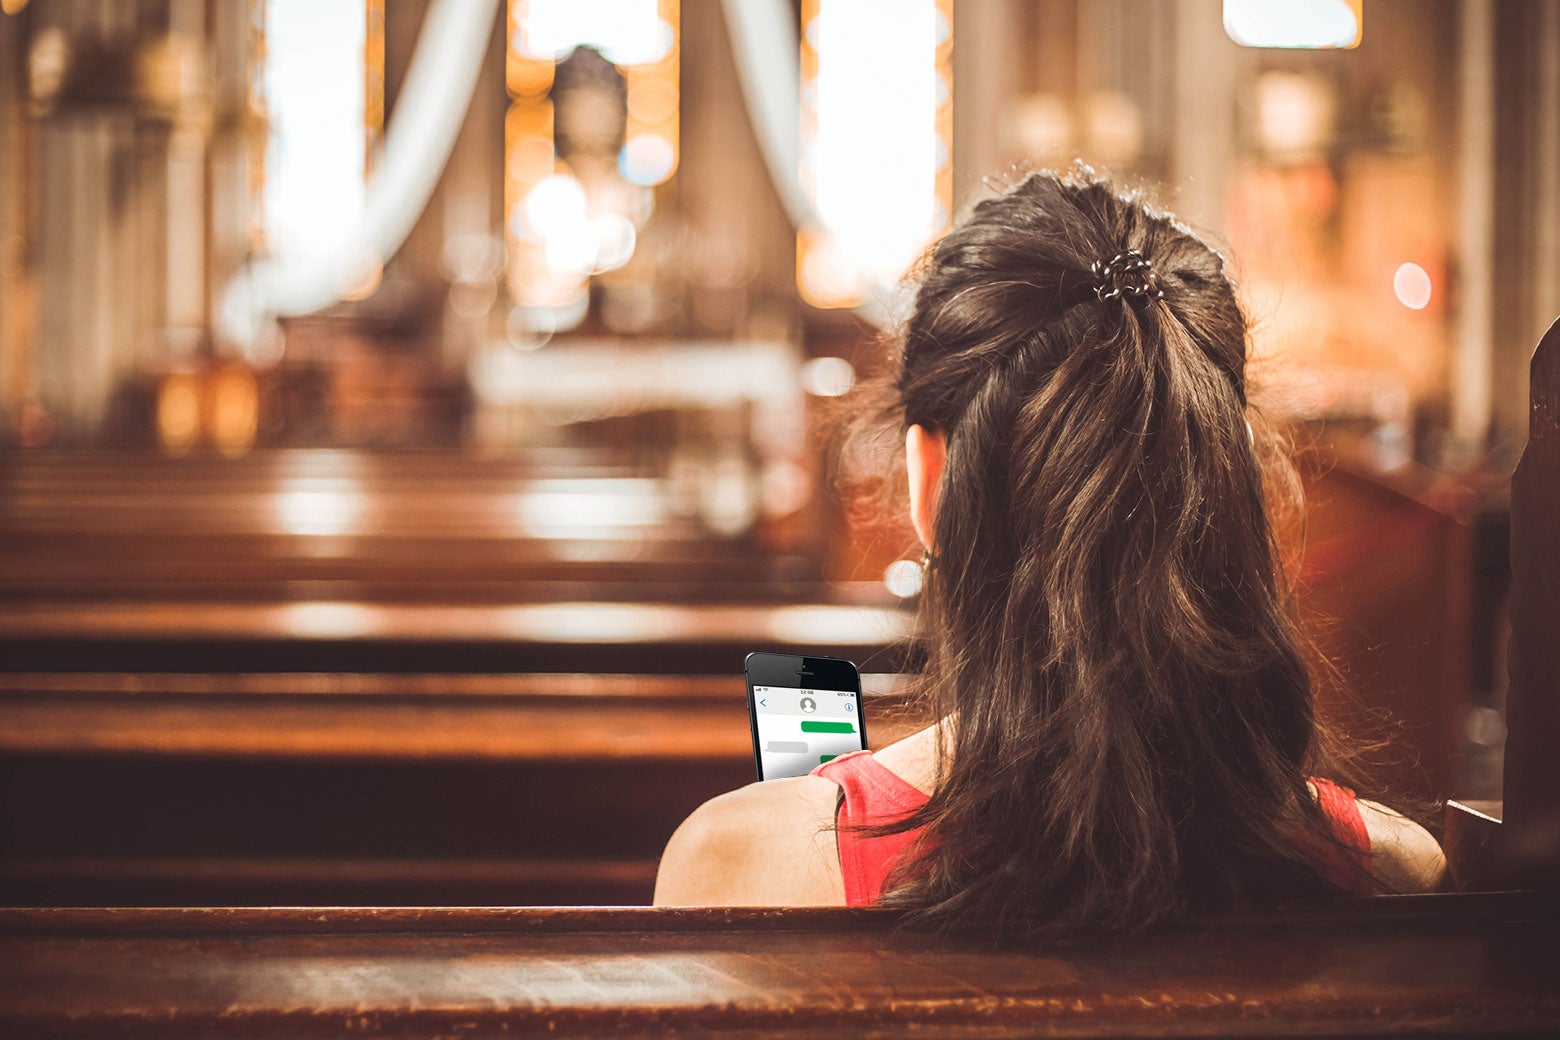 A worshipper stares at their phone while sitting in a church pew.